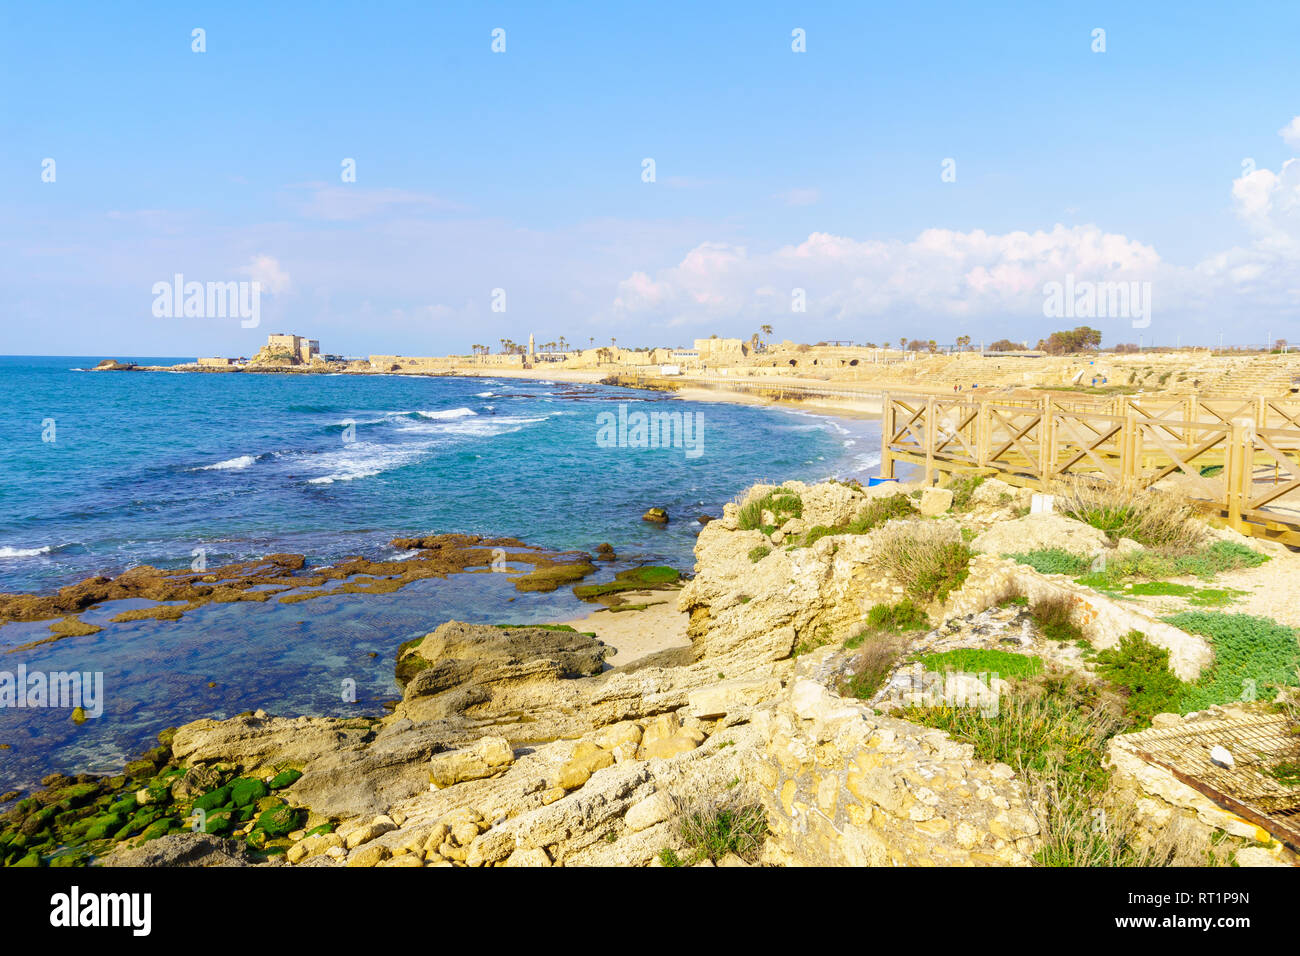 View of the beach and the old port in Caesarea National Park, Northern Israel Stock Photo